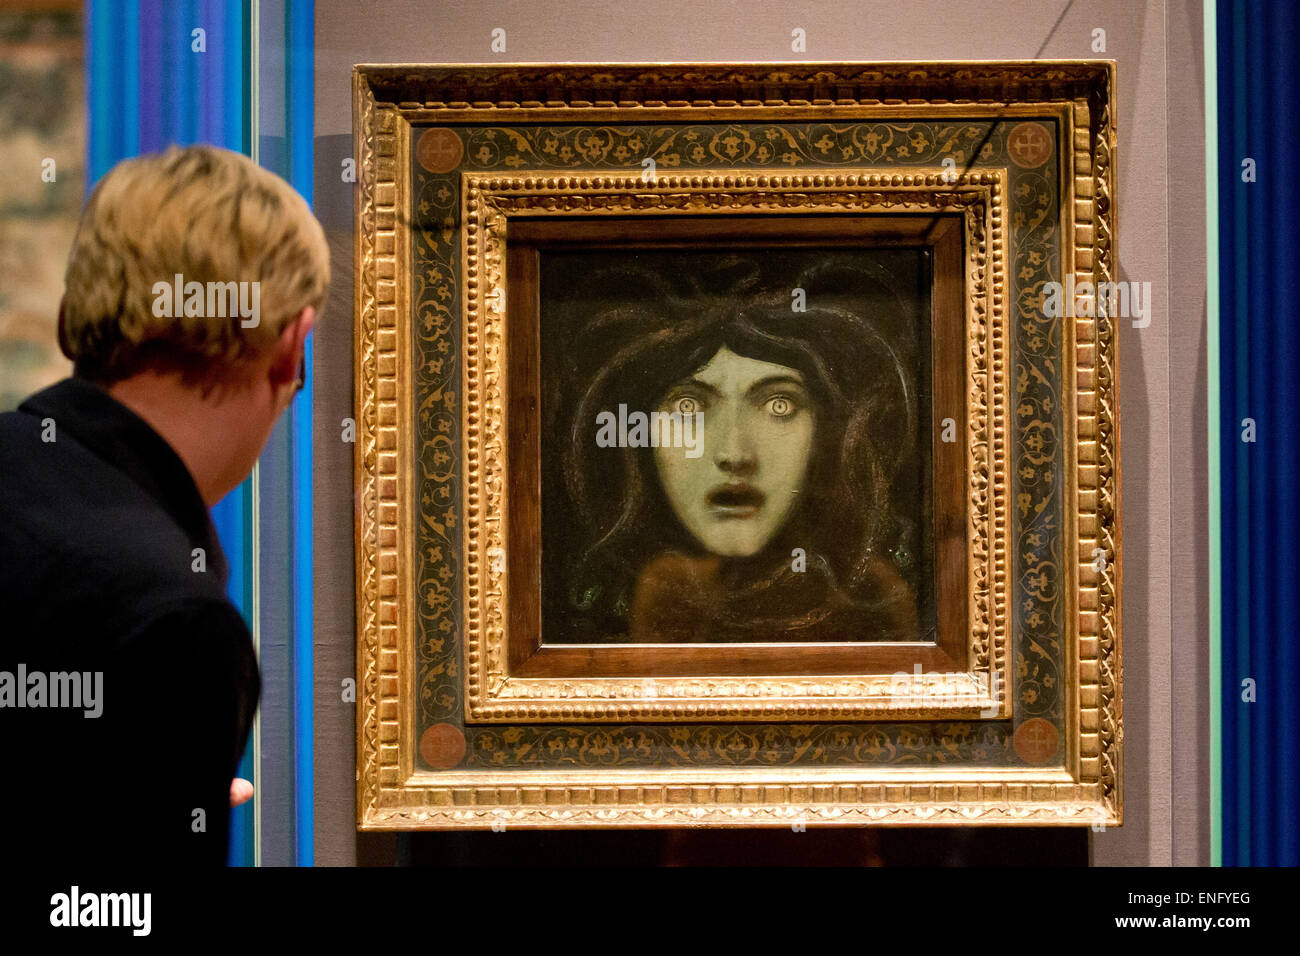 The painting 'Medusa' by Franz von Stuck (around 1892) can be seen during the set-up of the exhibition 'Monsters. Images from the Horrific to the Comic' at the Germanisches Nationalmuseum in Nuremberg, Germany, 04 May 2015. The special exhibition, which runs from 07 May to 09 September 2015, presents monster myths from the middle ages to day. Photo: DANIEL KARMANN/dpa Stock Photo